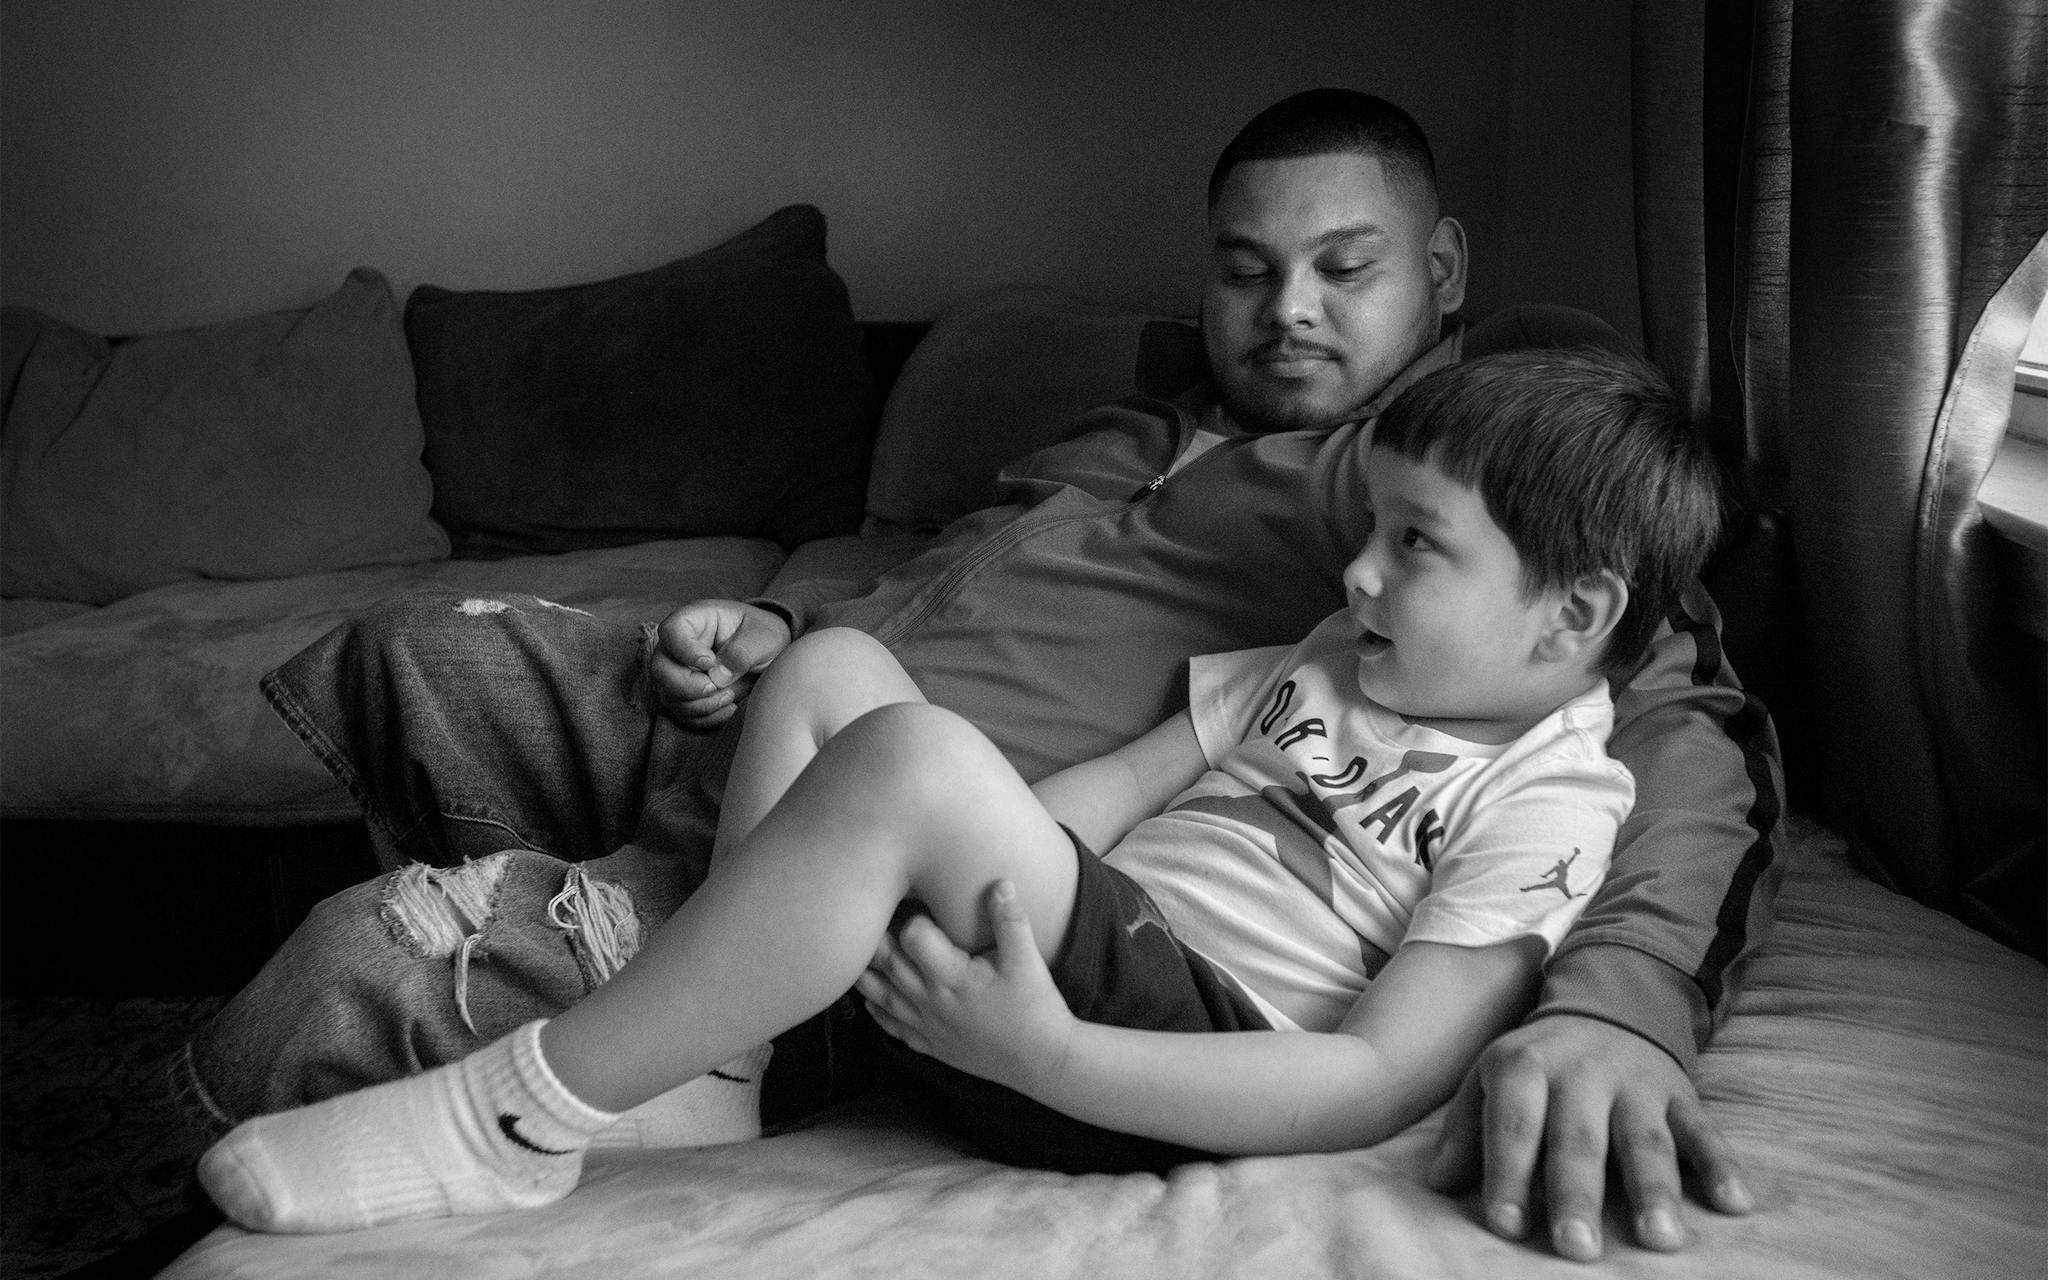 Josh Fabela with his four-year-old son Joshua Jr. at their Austin apartment on February 8, 2020.